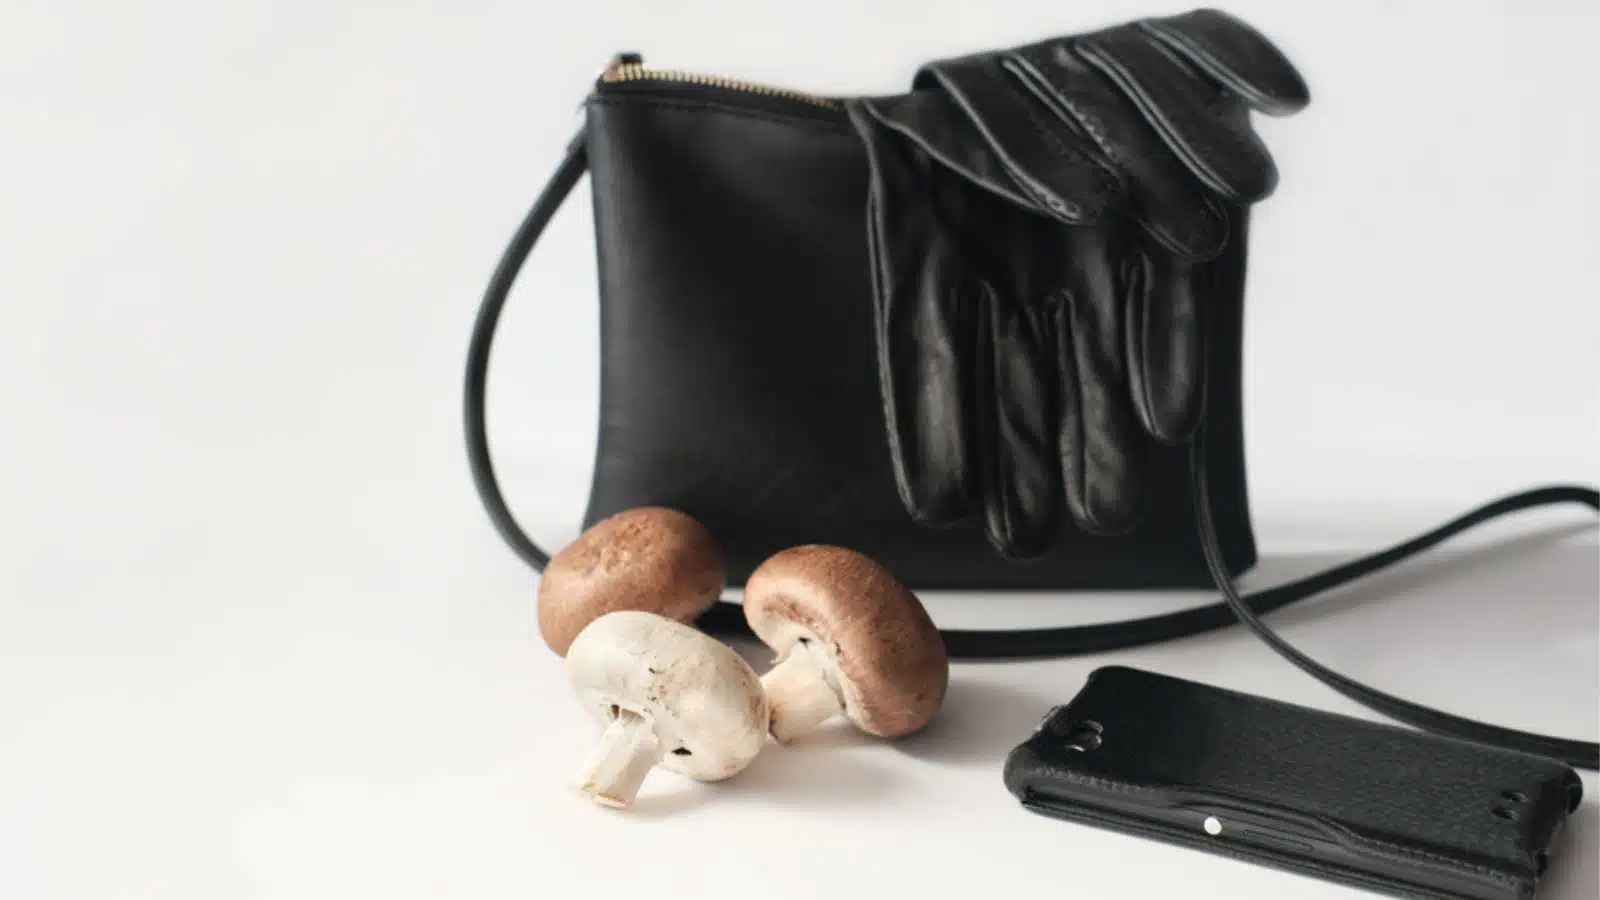 bag, gloves and phone case made of mycelium leather. vegan alternative leather. mushroom fiber textile as innovative eco material for apparel and accessories.